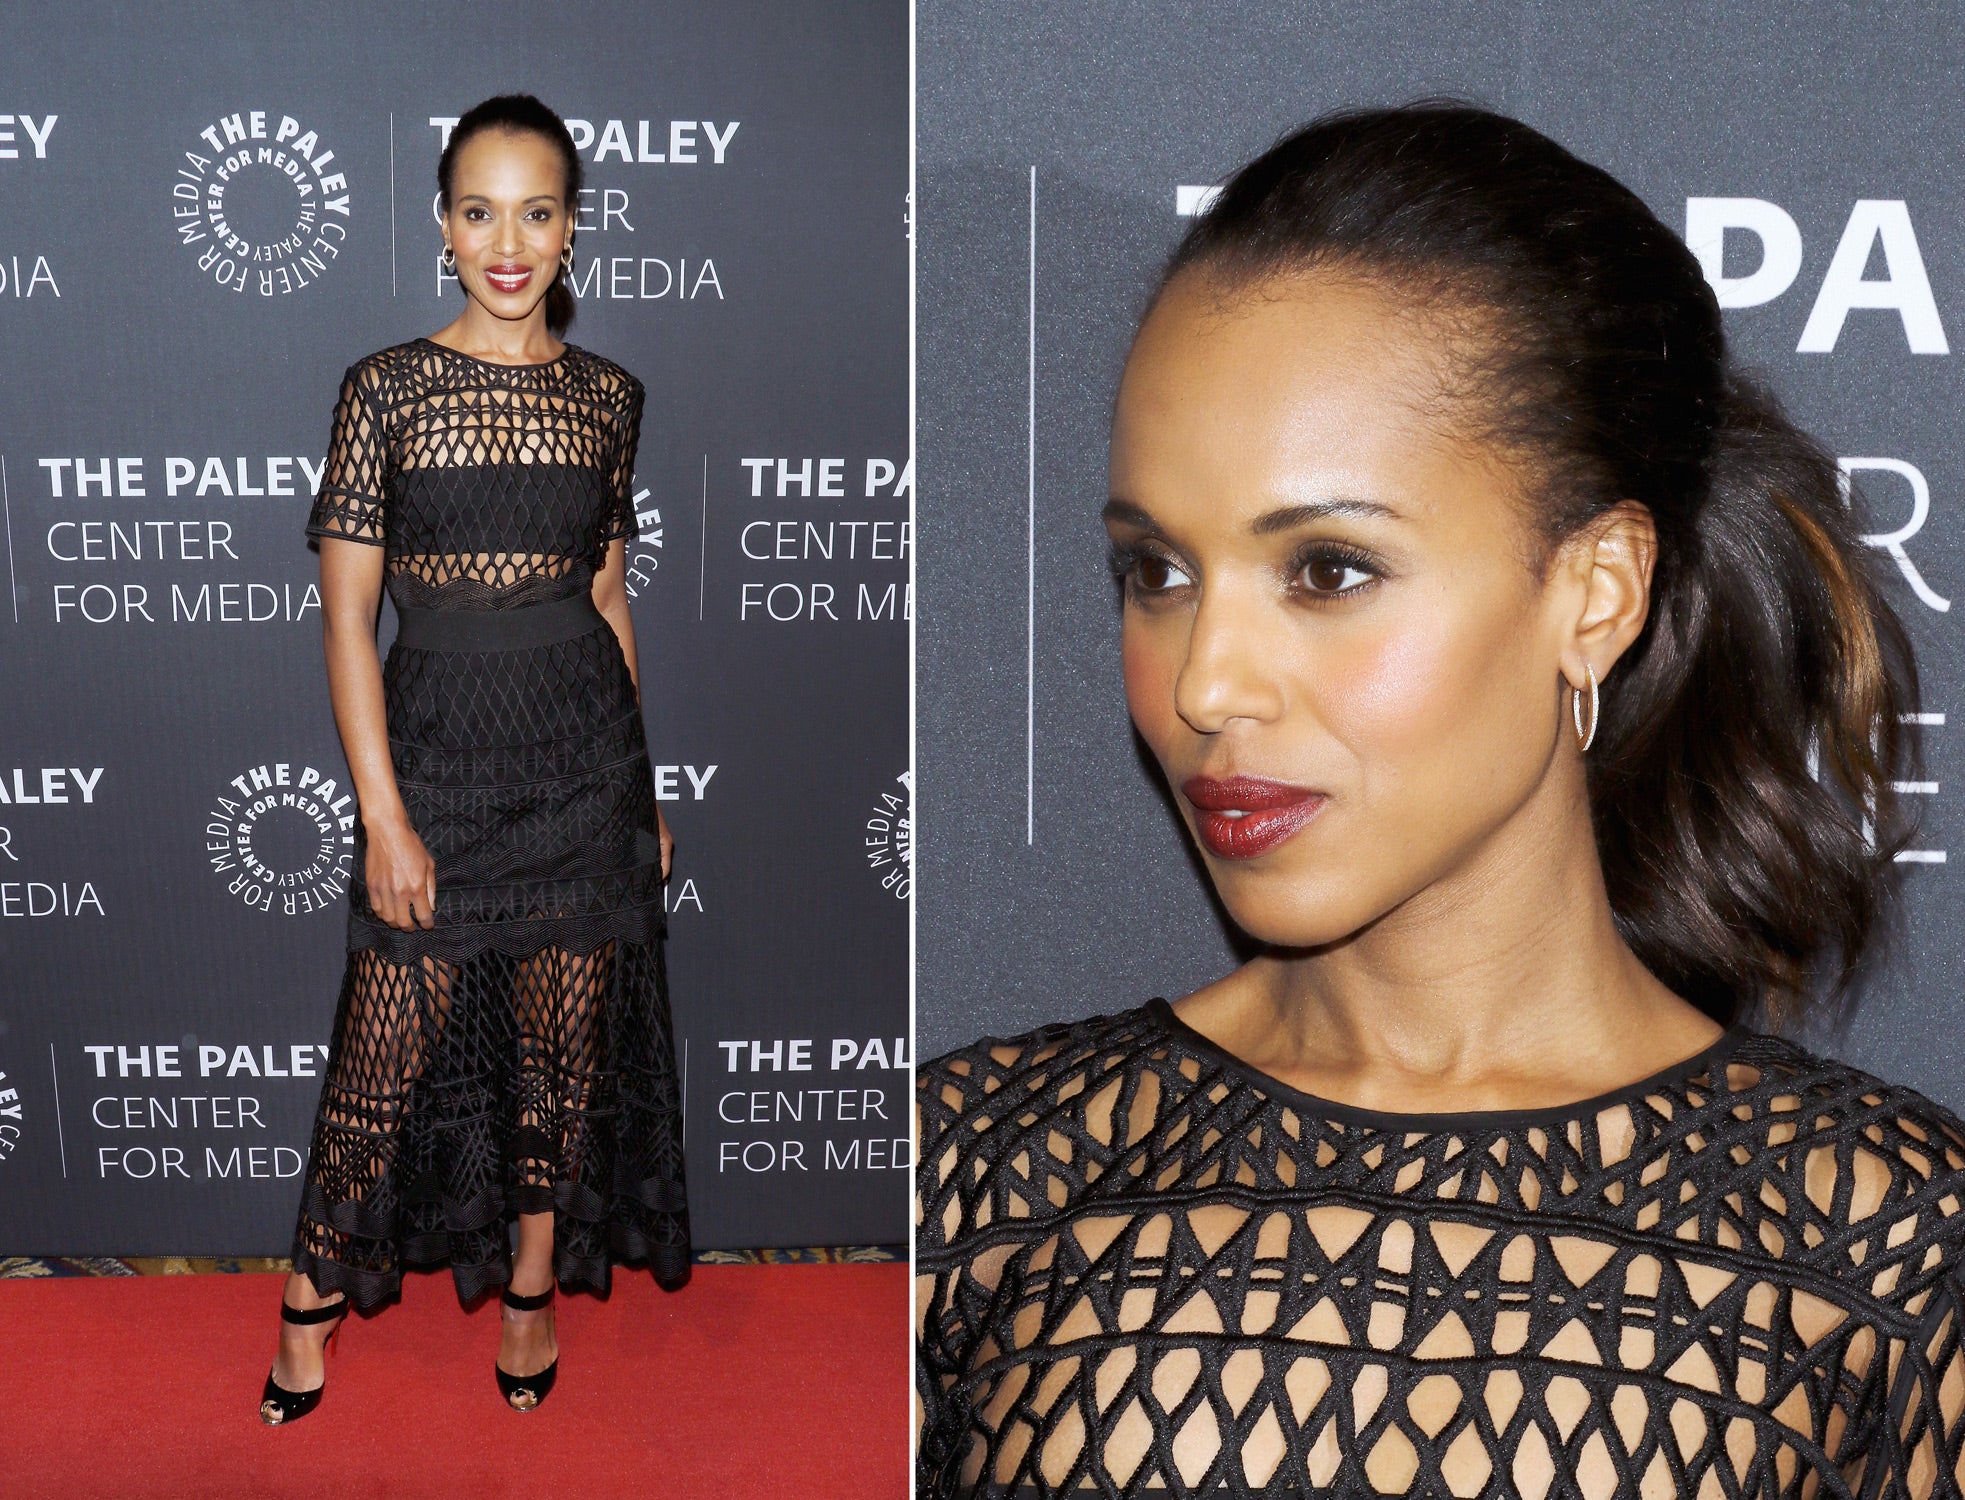 Why Kerry Washington Thinks It's An 'Exciting Time' for Diversity on TV
